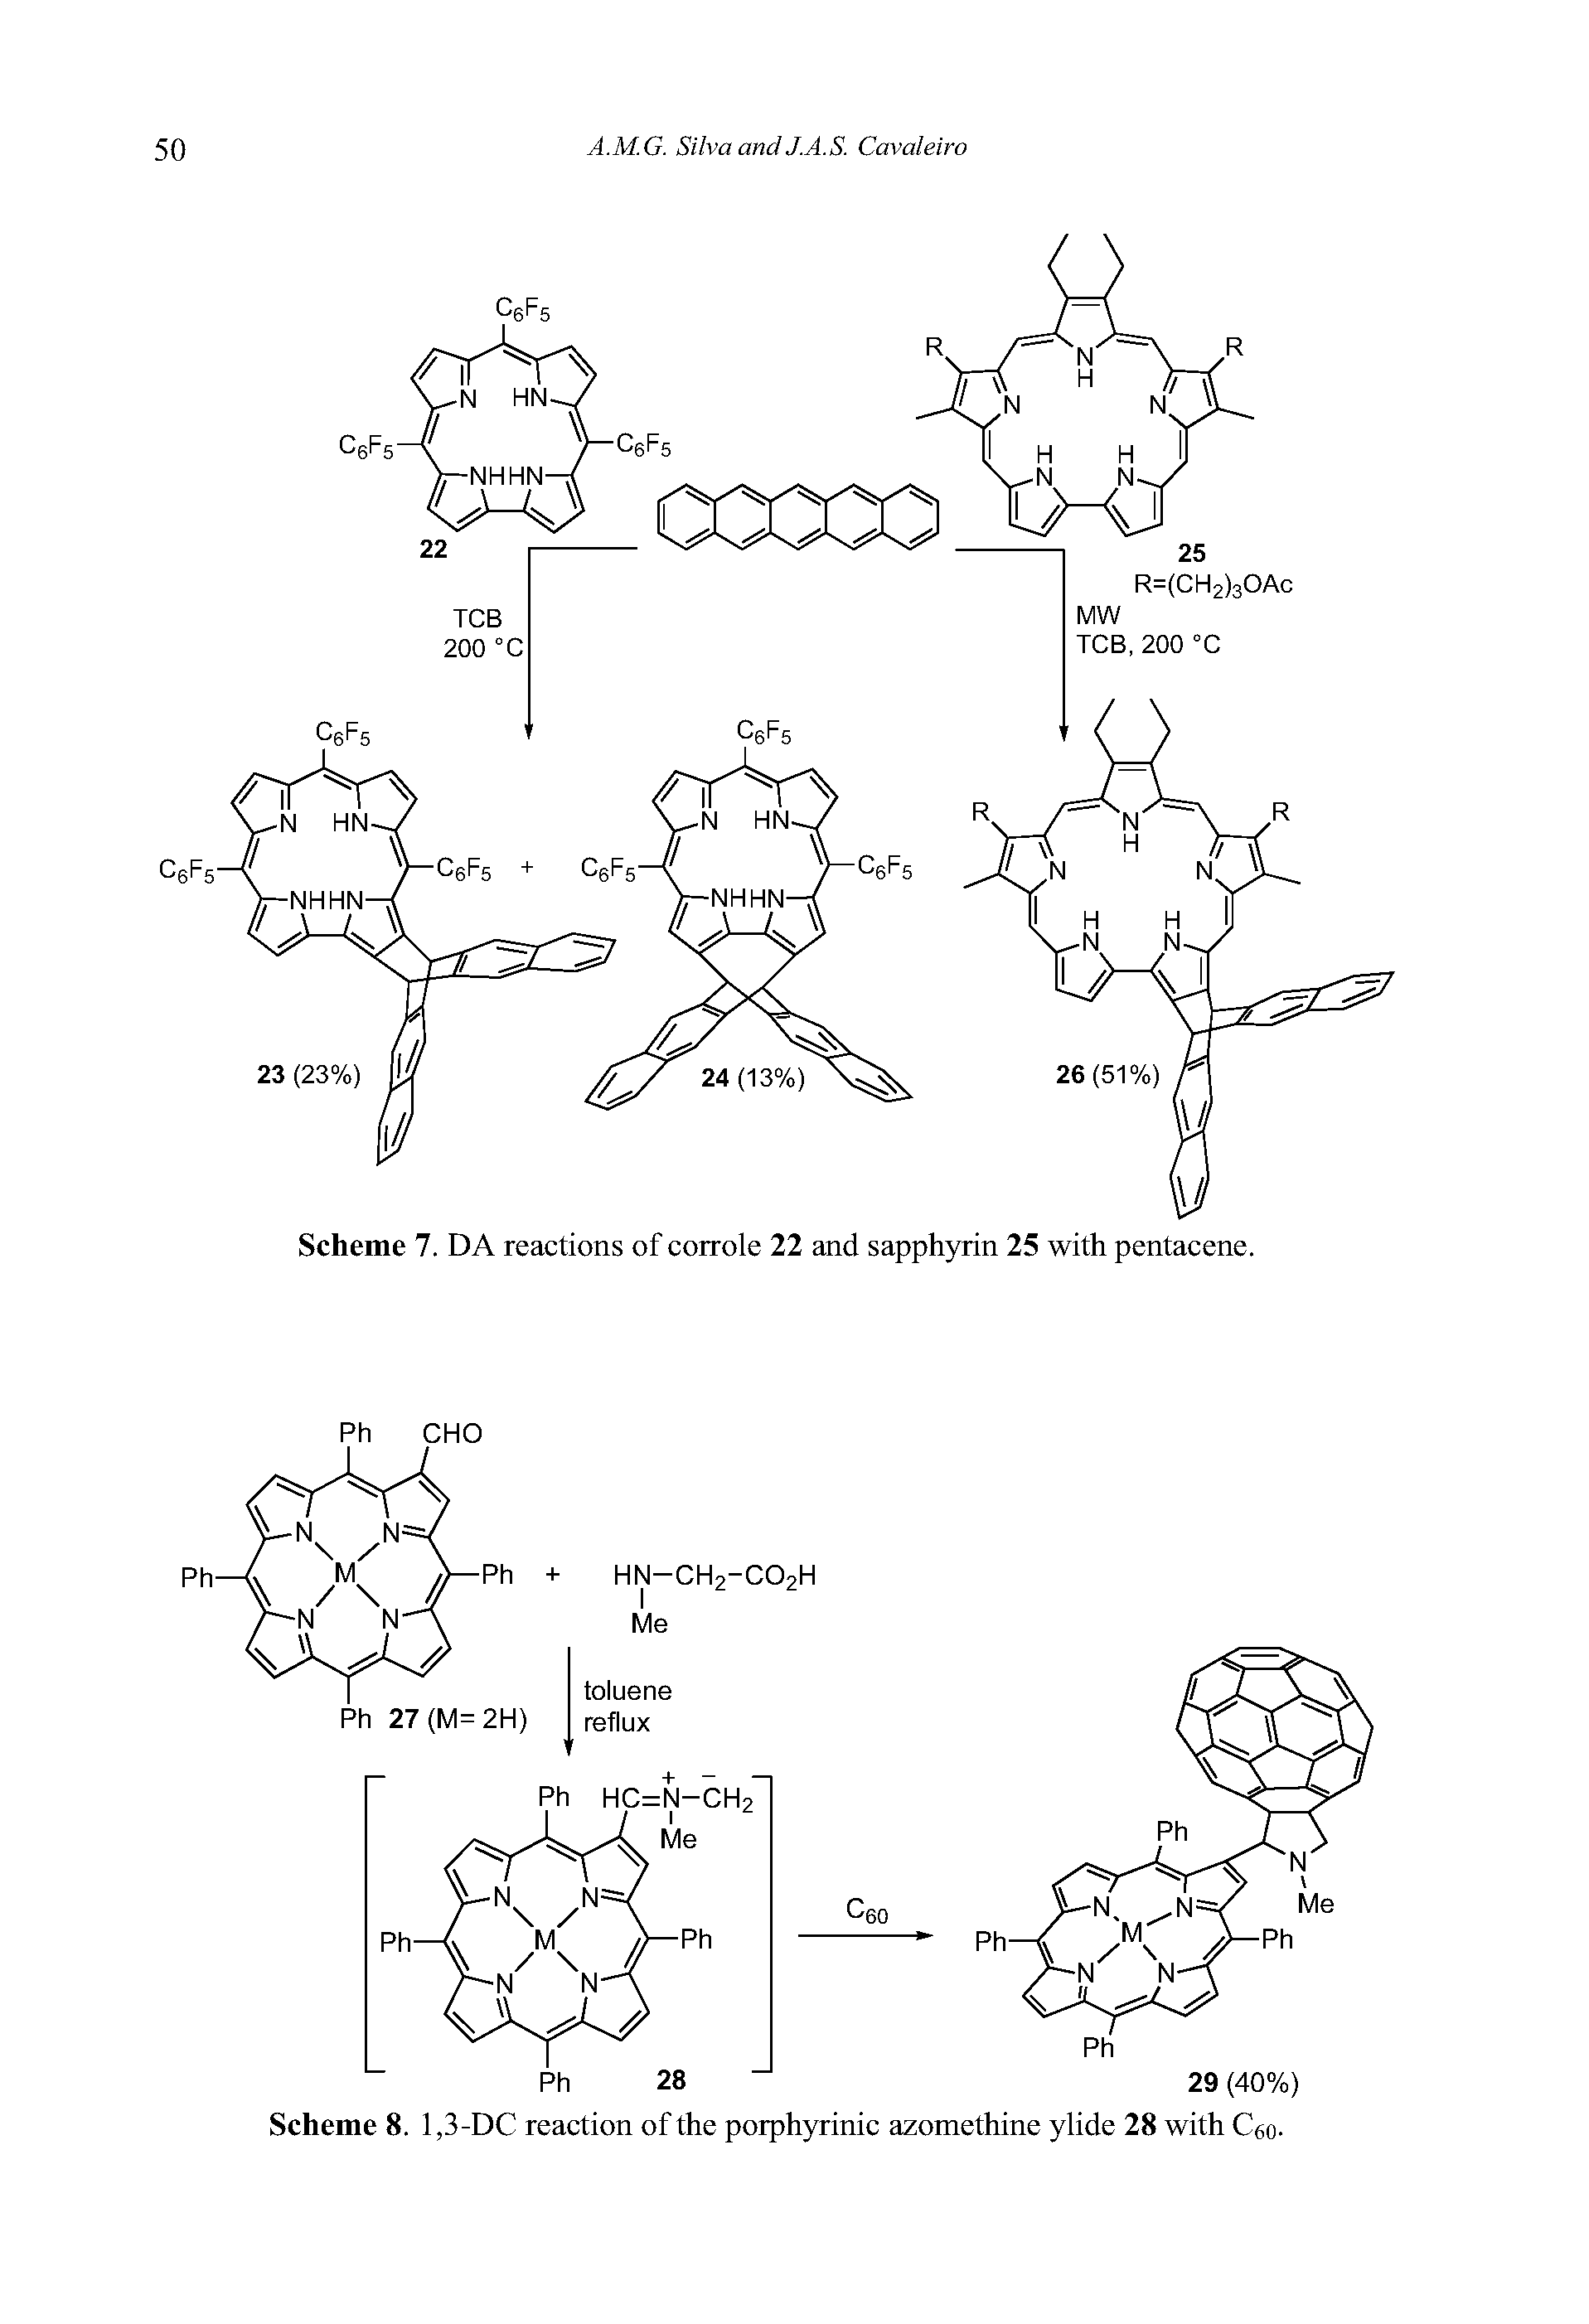 Scheme 8. 1,3-DC reaction of the porphyrinic azomethine ylide 28 with Cv,n.